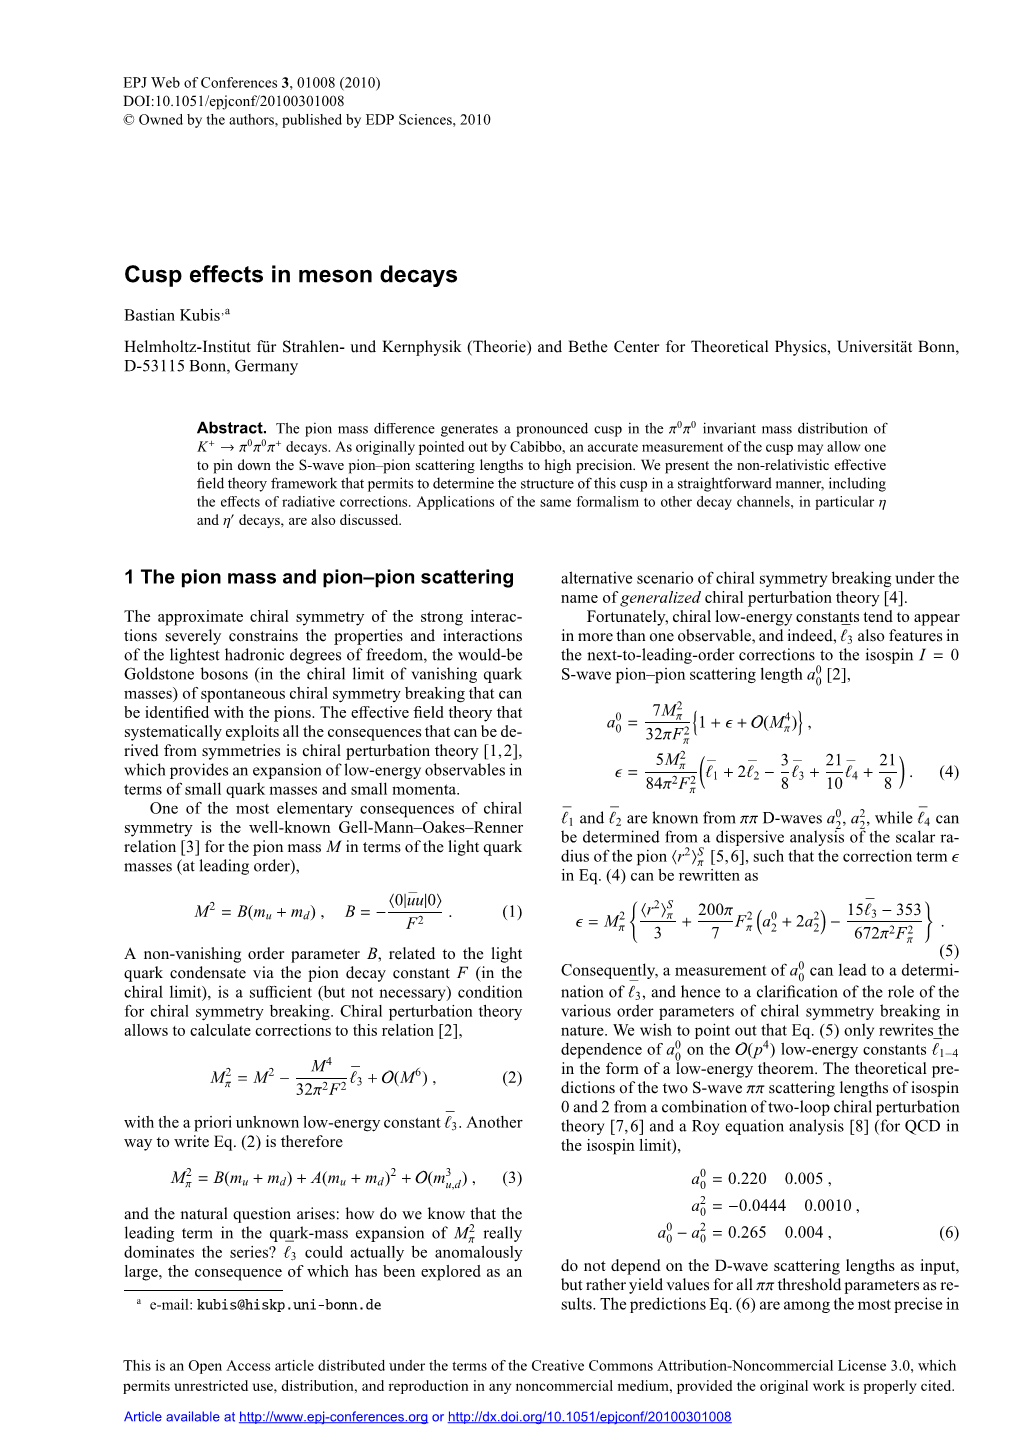 Cusp Effects in Meson Decays